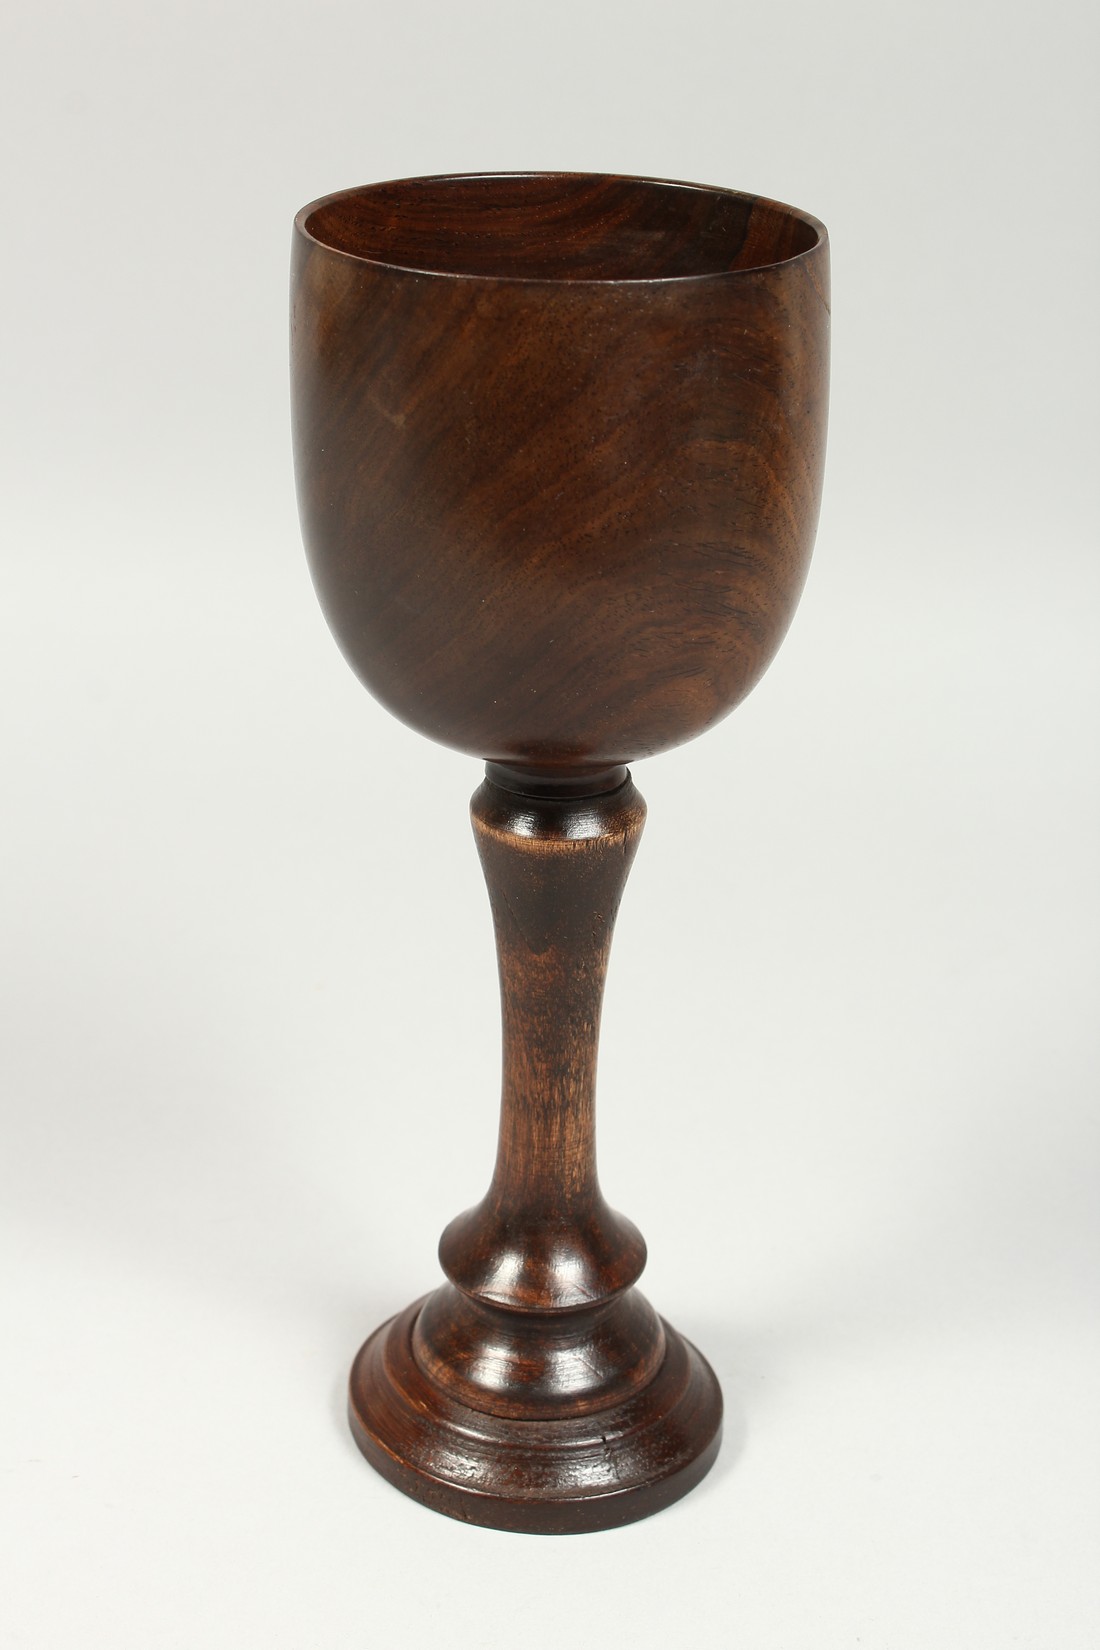 A GOOD TURNED WOOD GOBLET 11.5ins high - Image 3 of 5